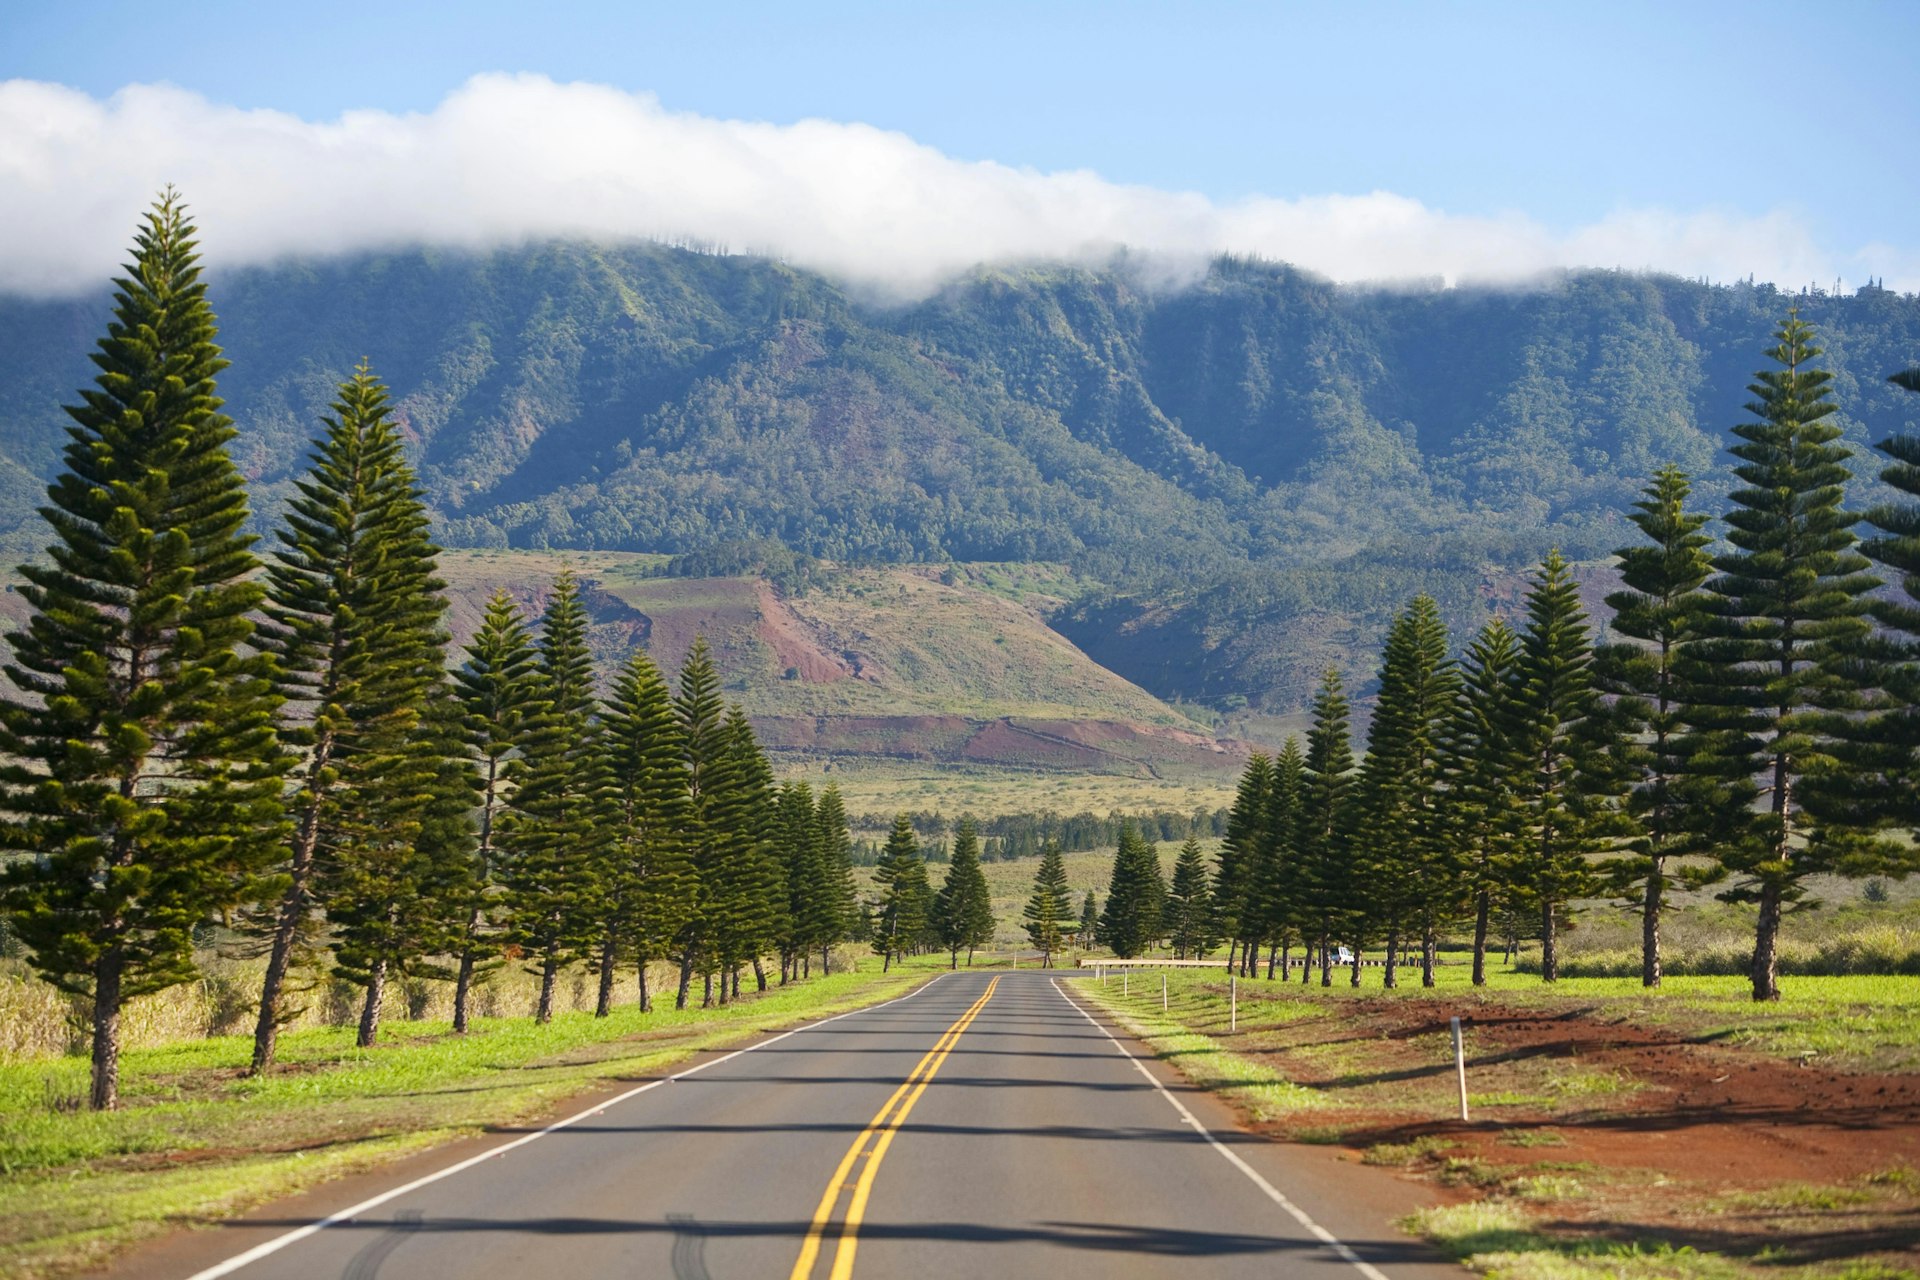 Pines alongside the road into Lanaʻi City. Image by  Ron Dahlquist / Perspectives / Getty